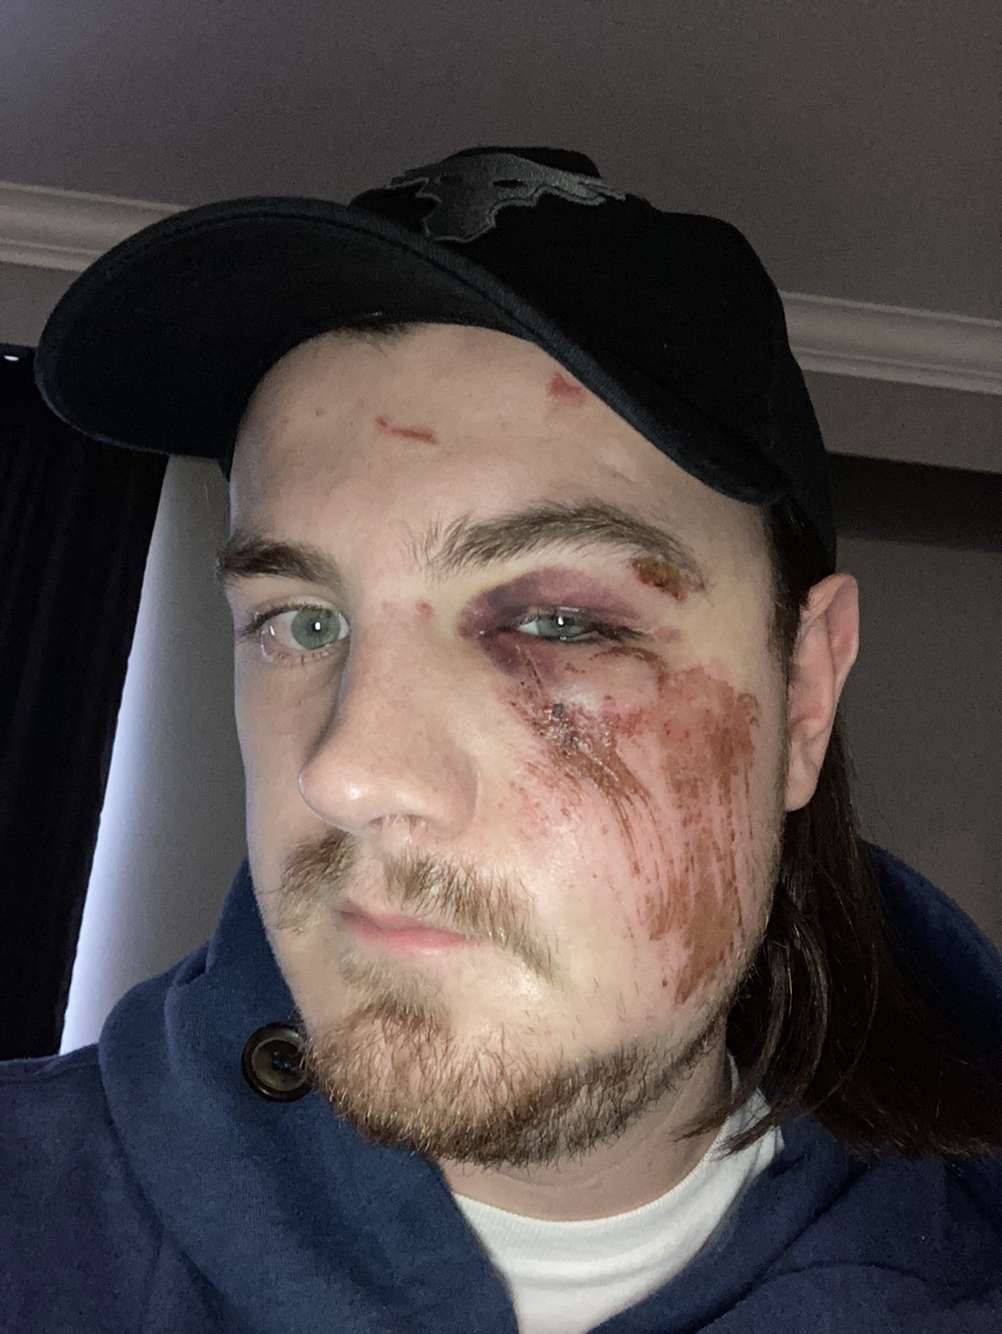 Patrick Bélanger shows injuries sustained during a trip to British Columbia. Bélanger of Quebec City says he was denied surgery for a week after he fell and broke his jaw and cheekbone and ended up in the emergency room of a hospital in B.C., where a surgeon told him he couldn't do the operation because Quebec "doesn't pay.".